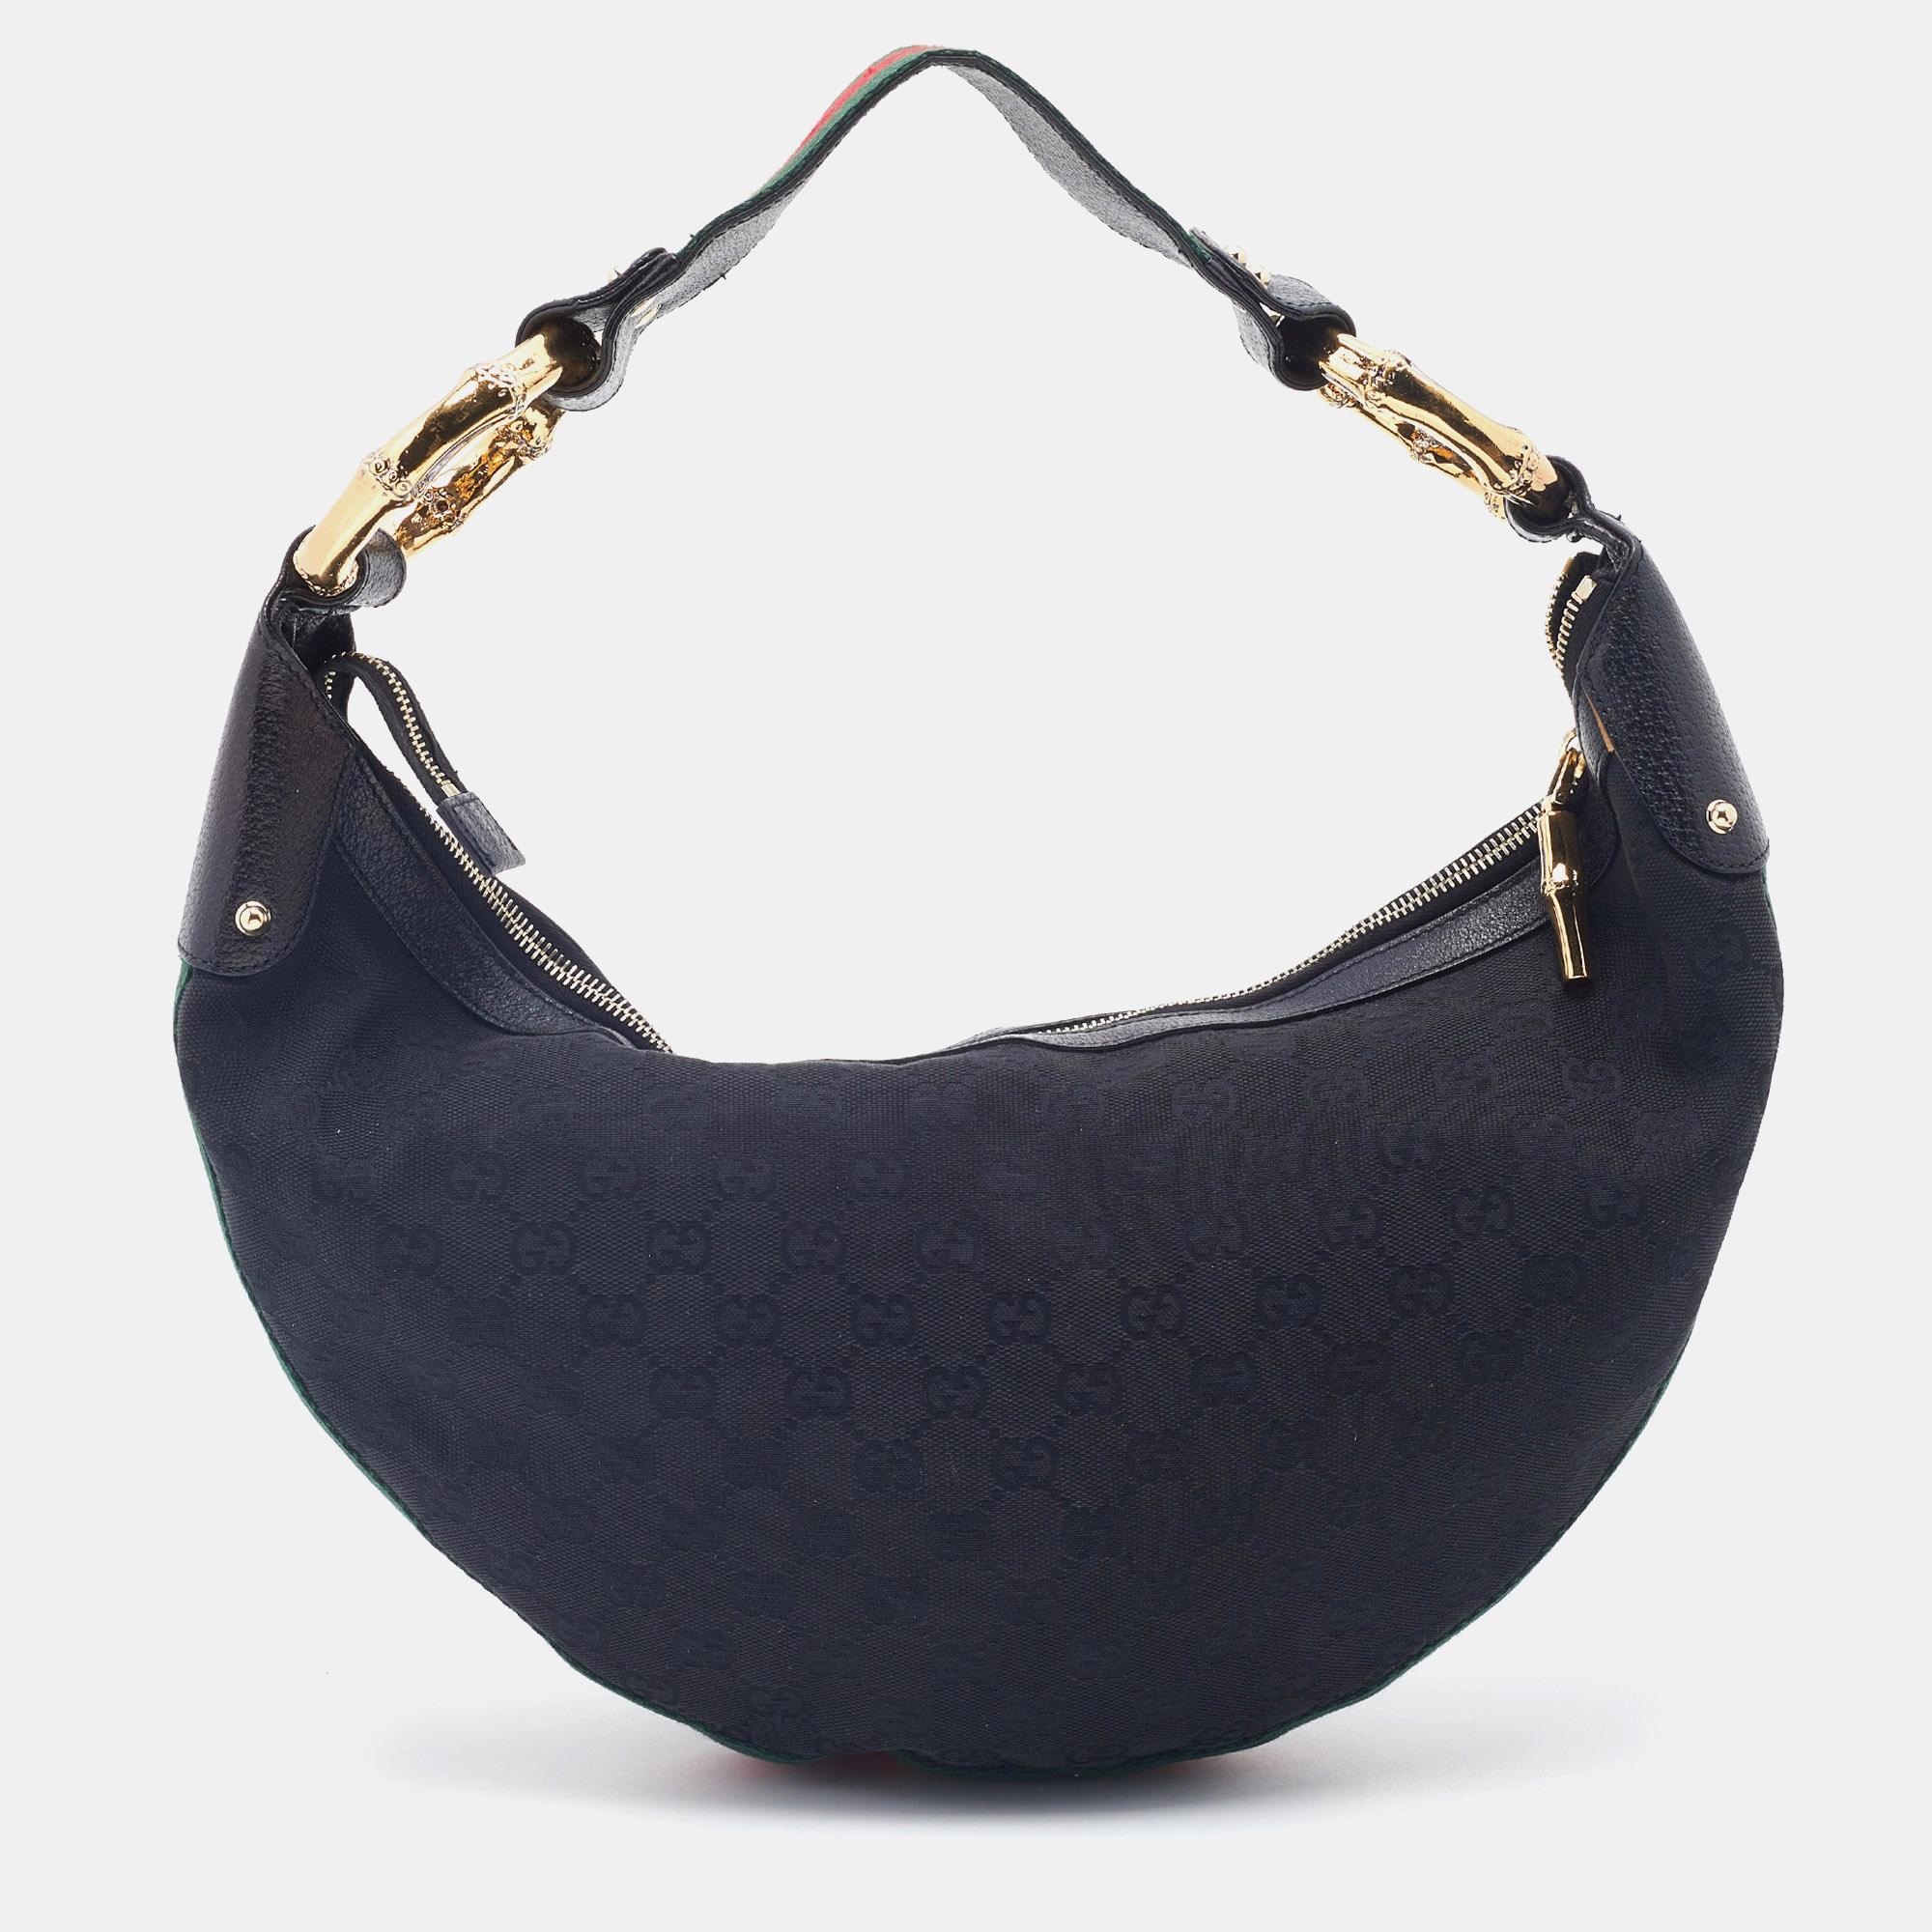 This stunning Bamboo Ring hobo comes from the House of Gucci. It has been crafted from black GG canvas and leather on the exterior. It features a single handle, a fabric-lined interior, and gold-toned hardware. Make this stunning Gucci hobo yours